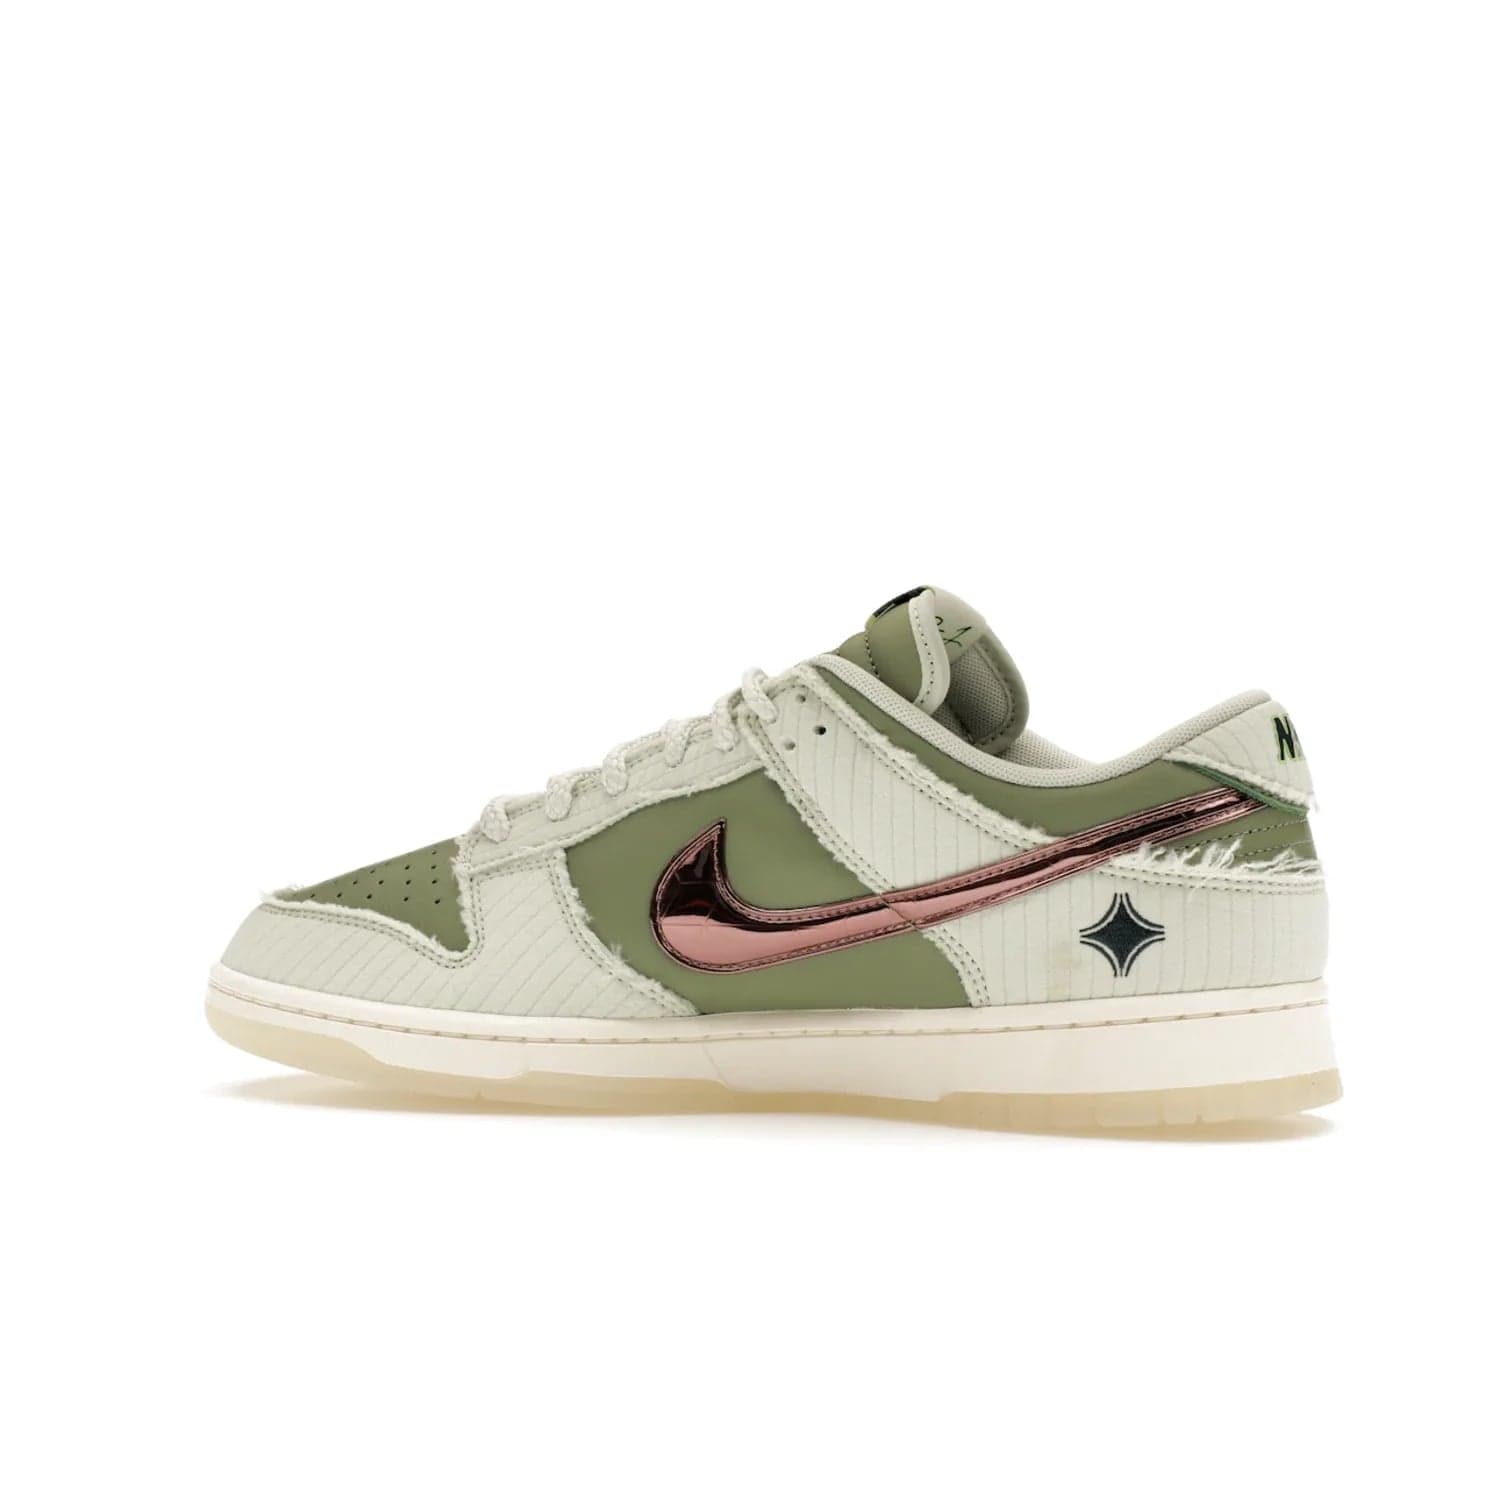 Nike Dunk Low Retro PRM Kyler Murray Be 1 of One - Image 21 - Only at www.BallersClubKickz.com - Introducing the Nike Dunk Low Retro PRM Kyler Murray "Be 1 of One"! A Sea Glass upper with Sail and Oil Green accents, finished with Rose Gold accents. Drop date: November 10th.